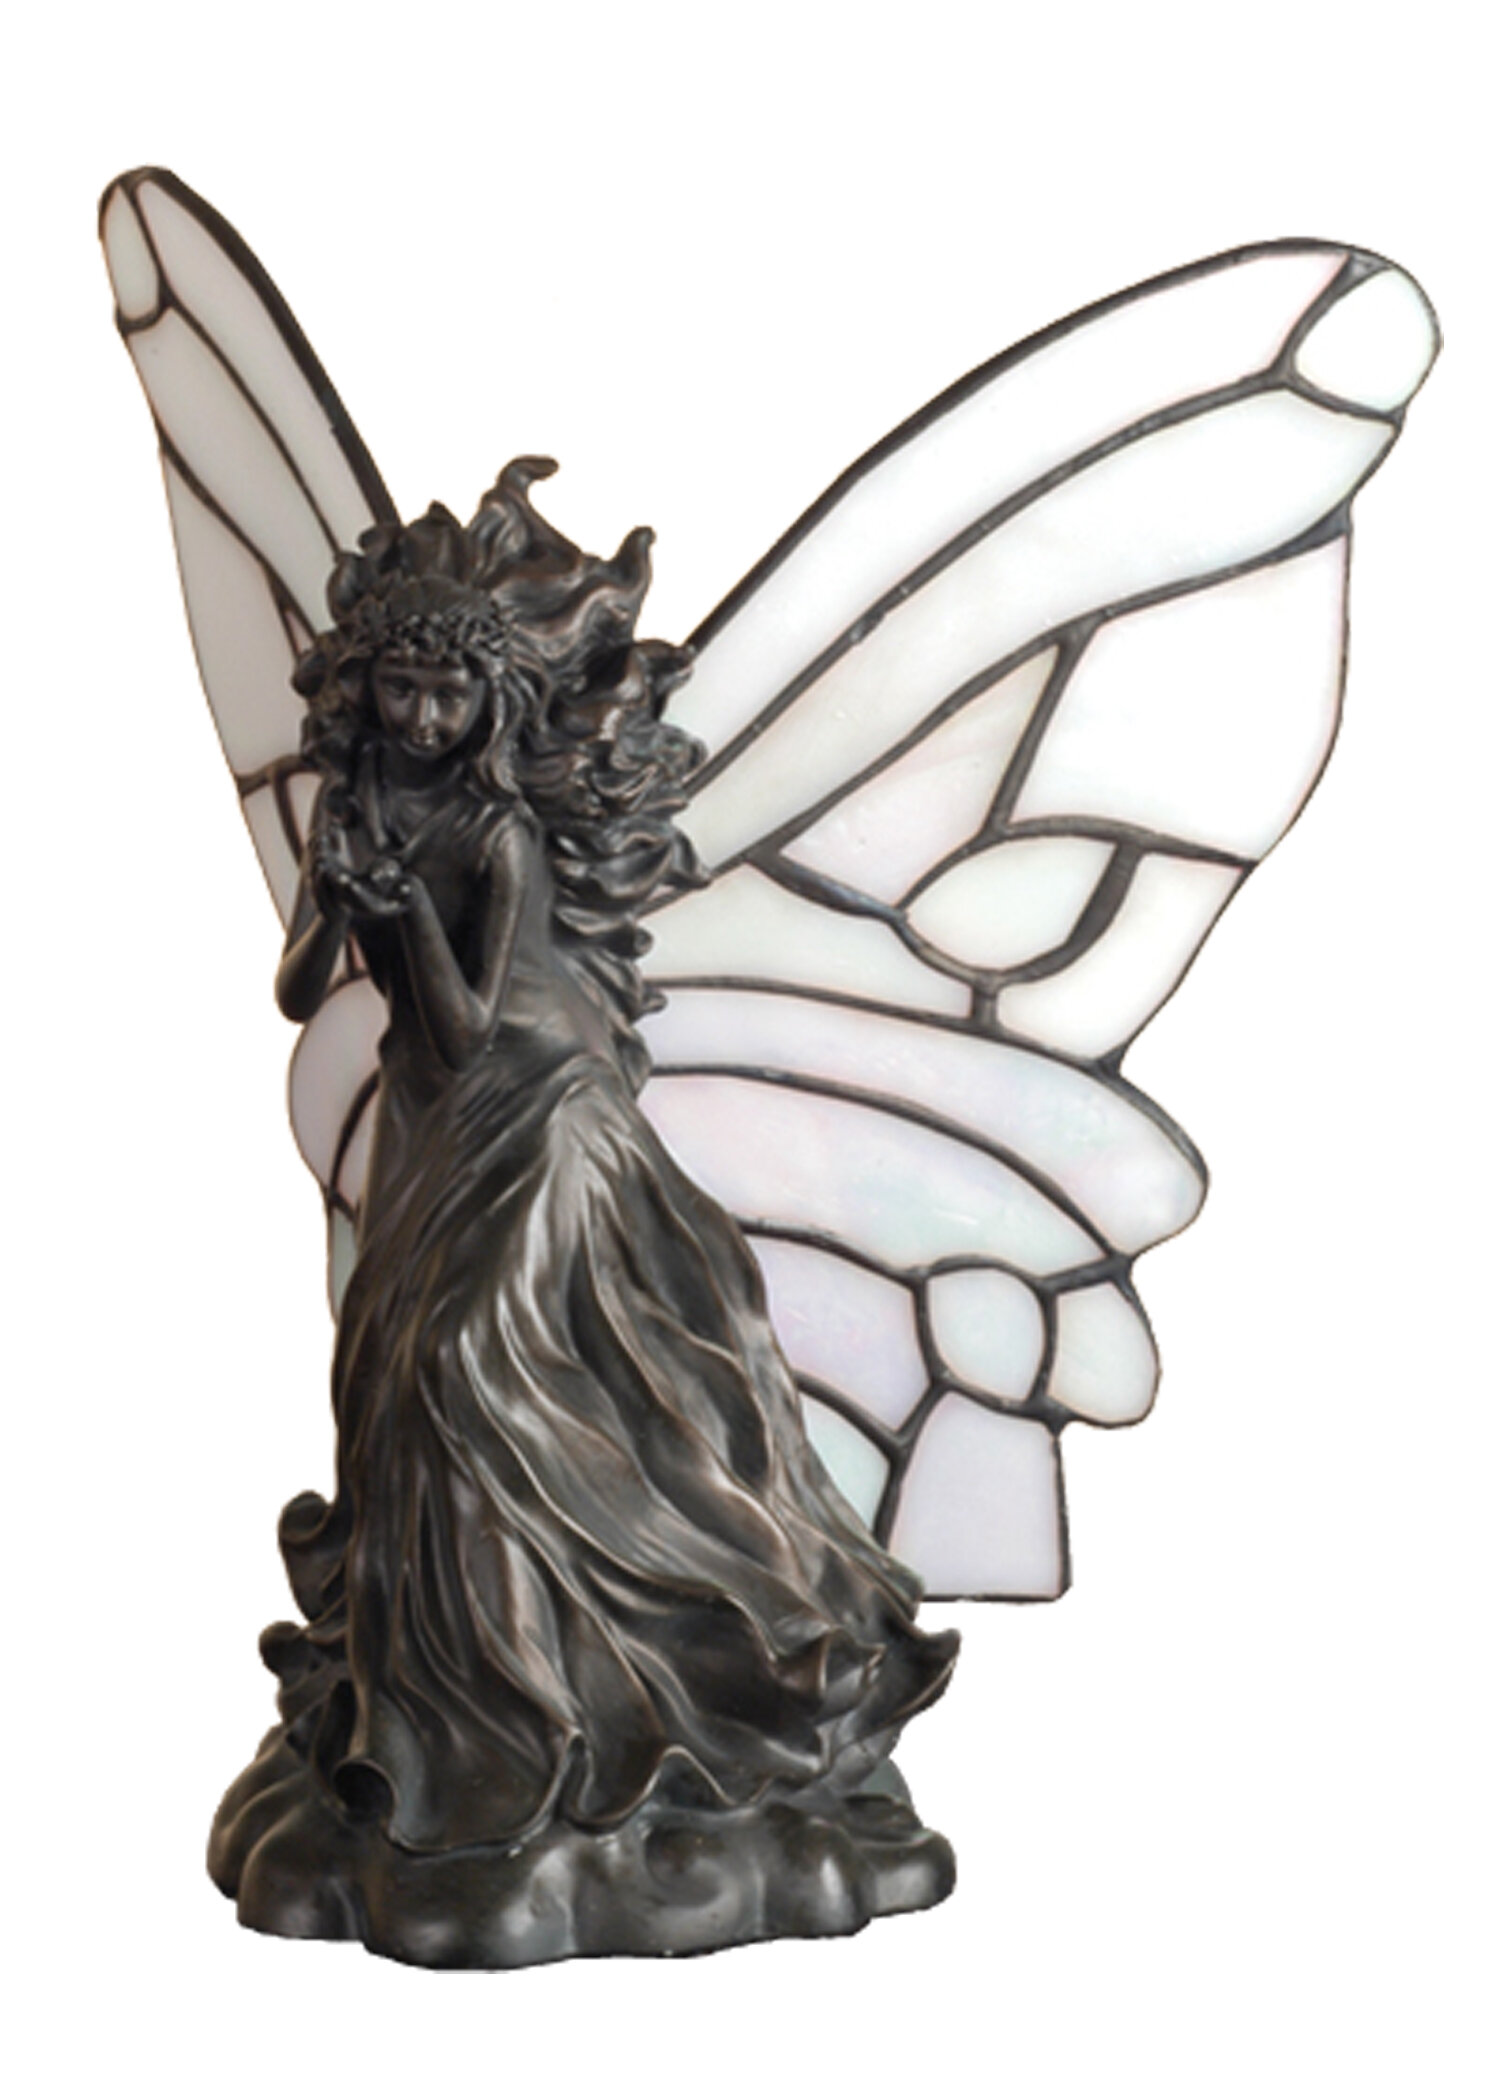 Fairy With Blue Wings Holding Dragonfly Figurine Mythical Statue 